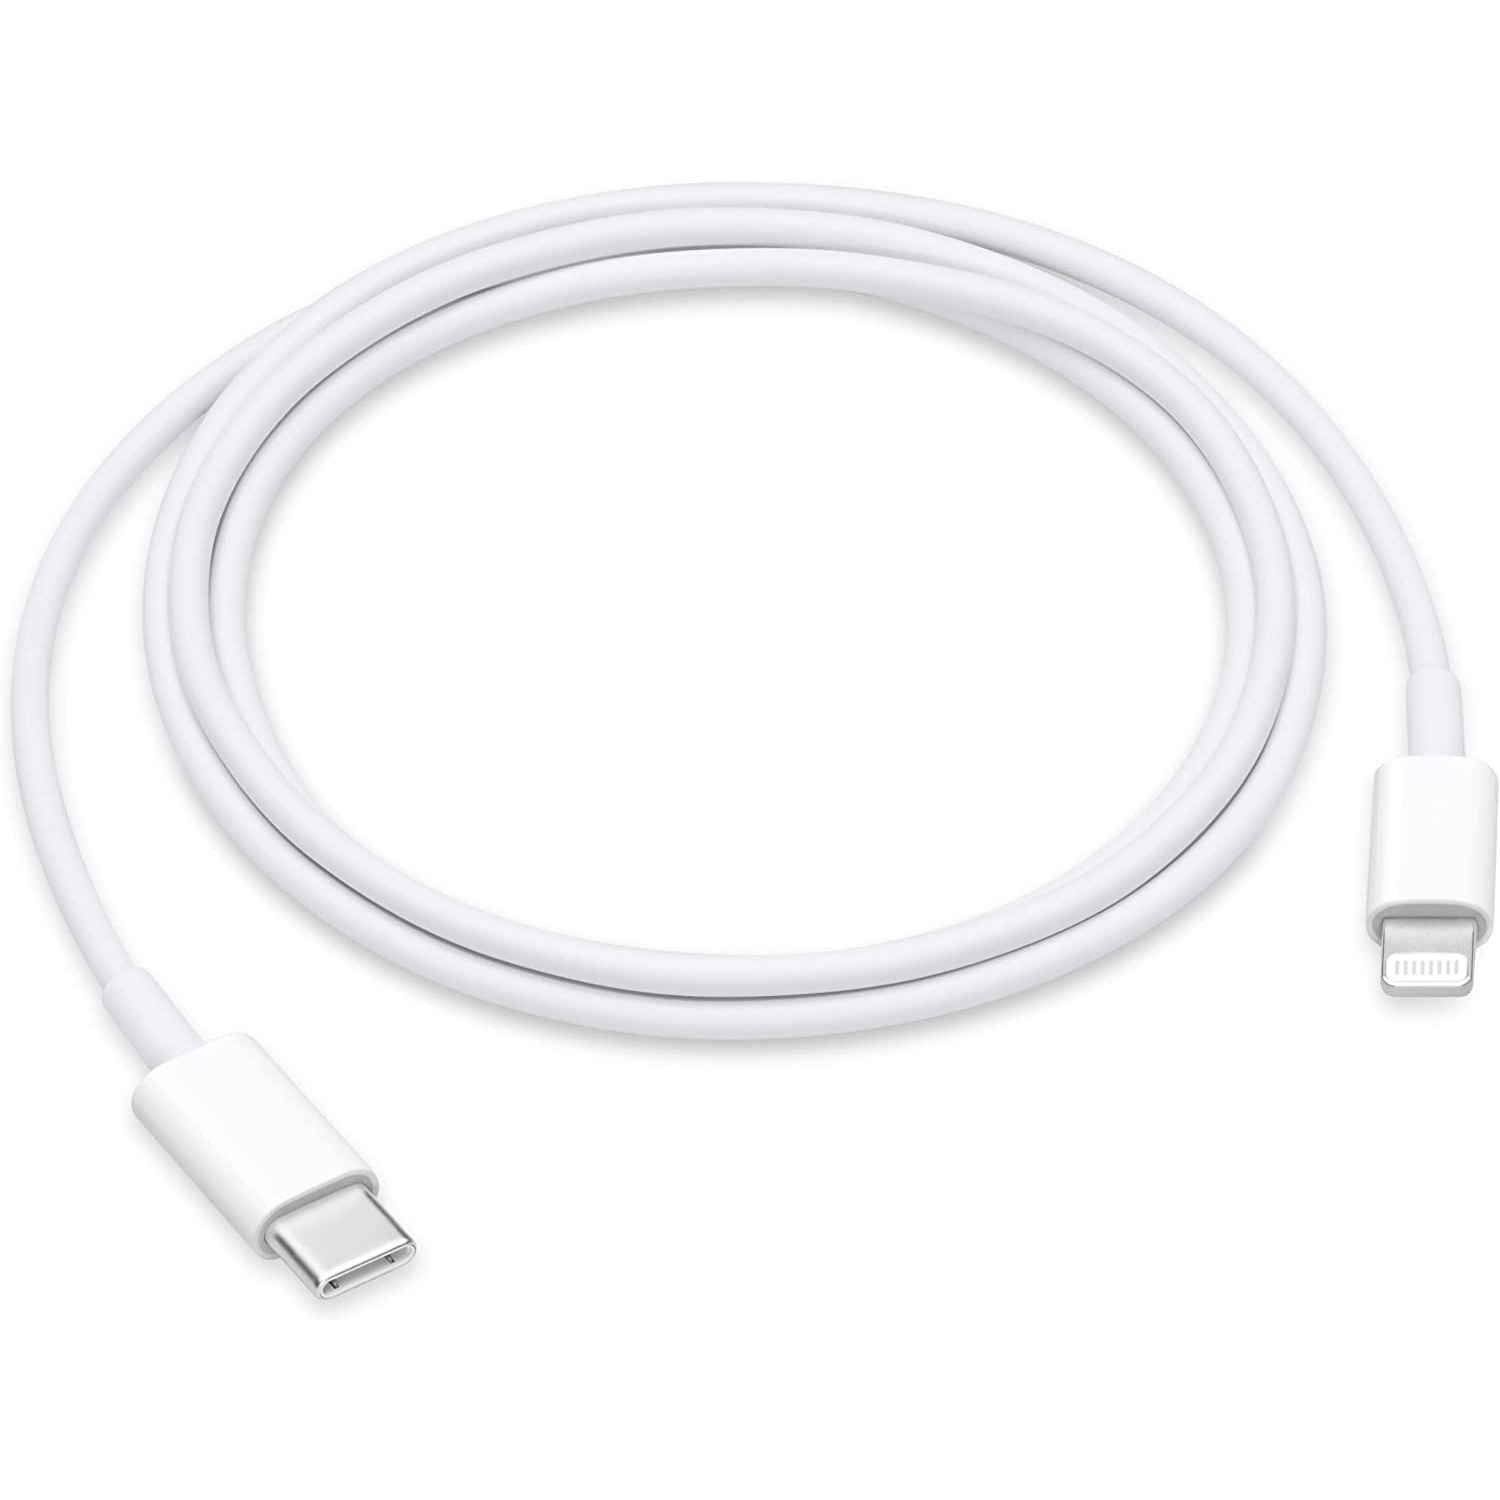 3Ft Apple MFi Certified USB C to Lightning Cable Fast Charging Syncing Cord for iPhone 14 13 12 11 Pro Max /XS/XR/X/8/8 Plus, New iPad Pro, Supports Power Delivery Type-C Charger